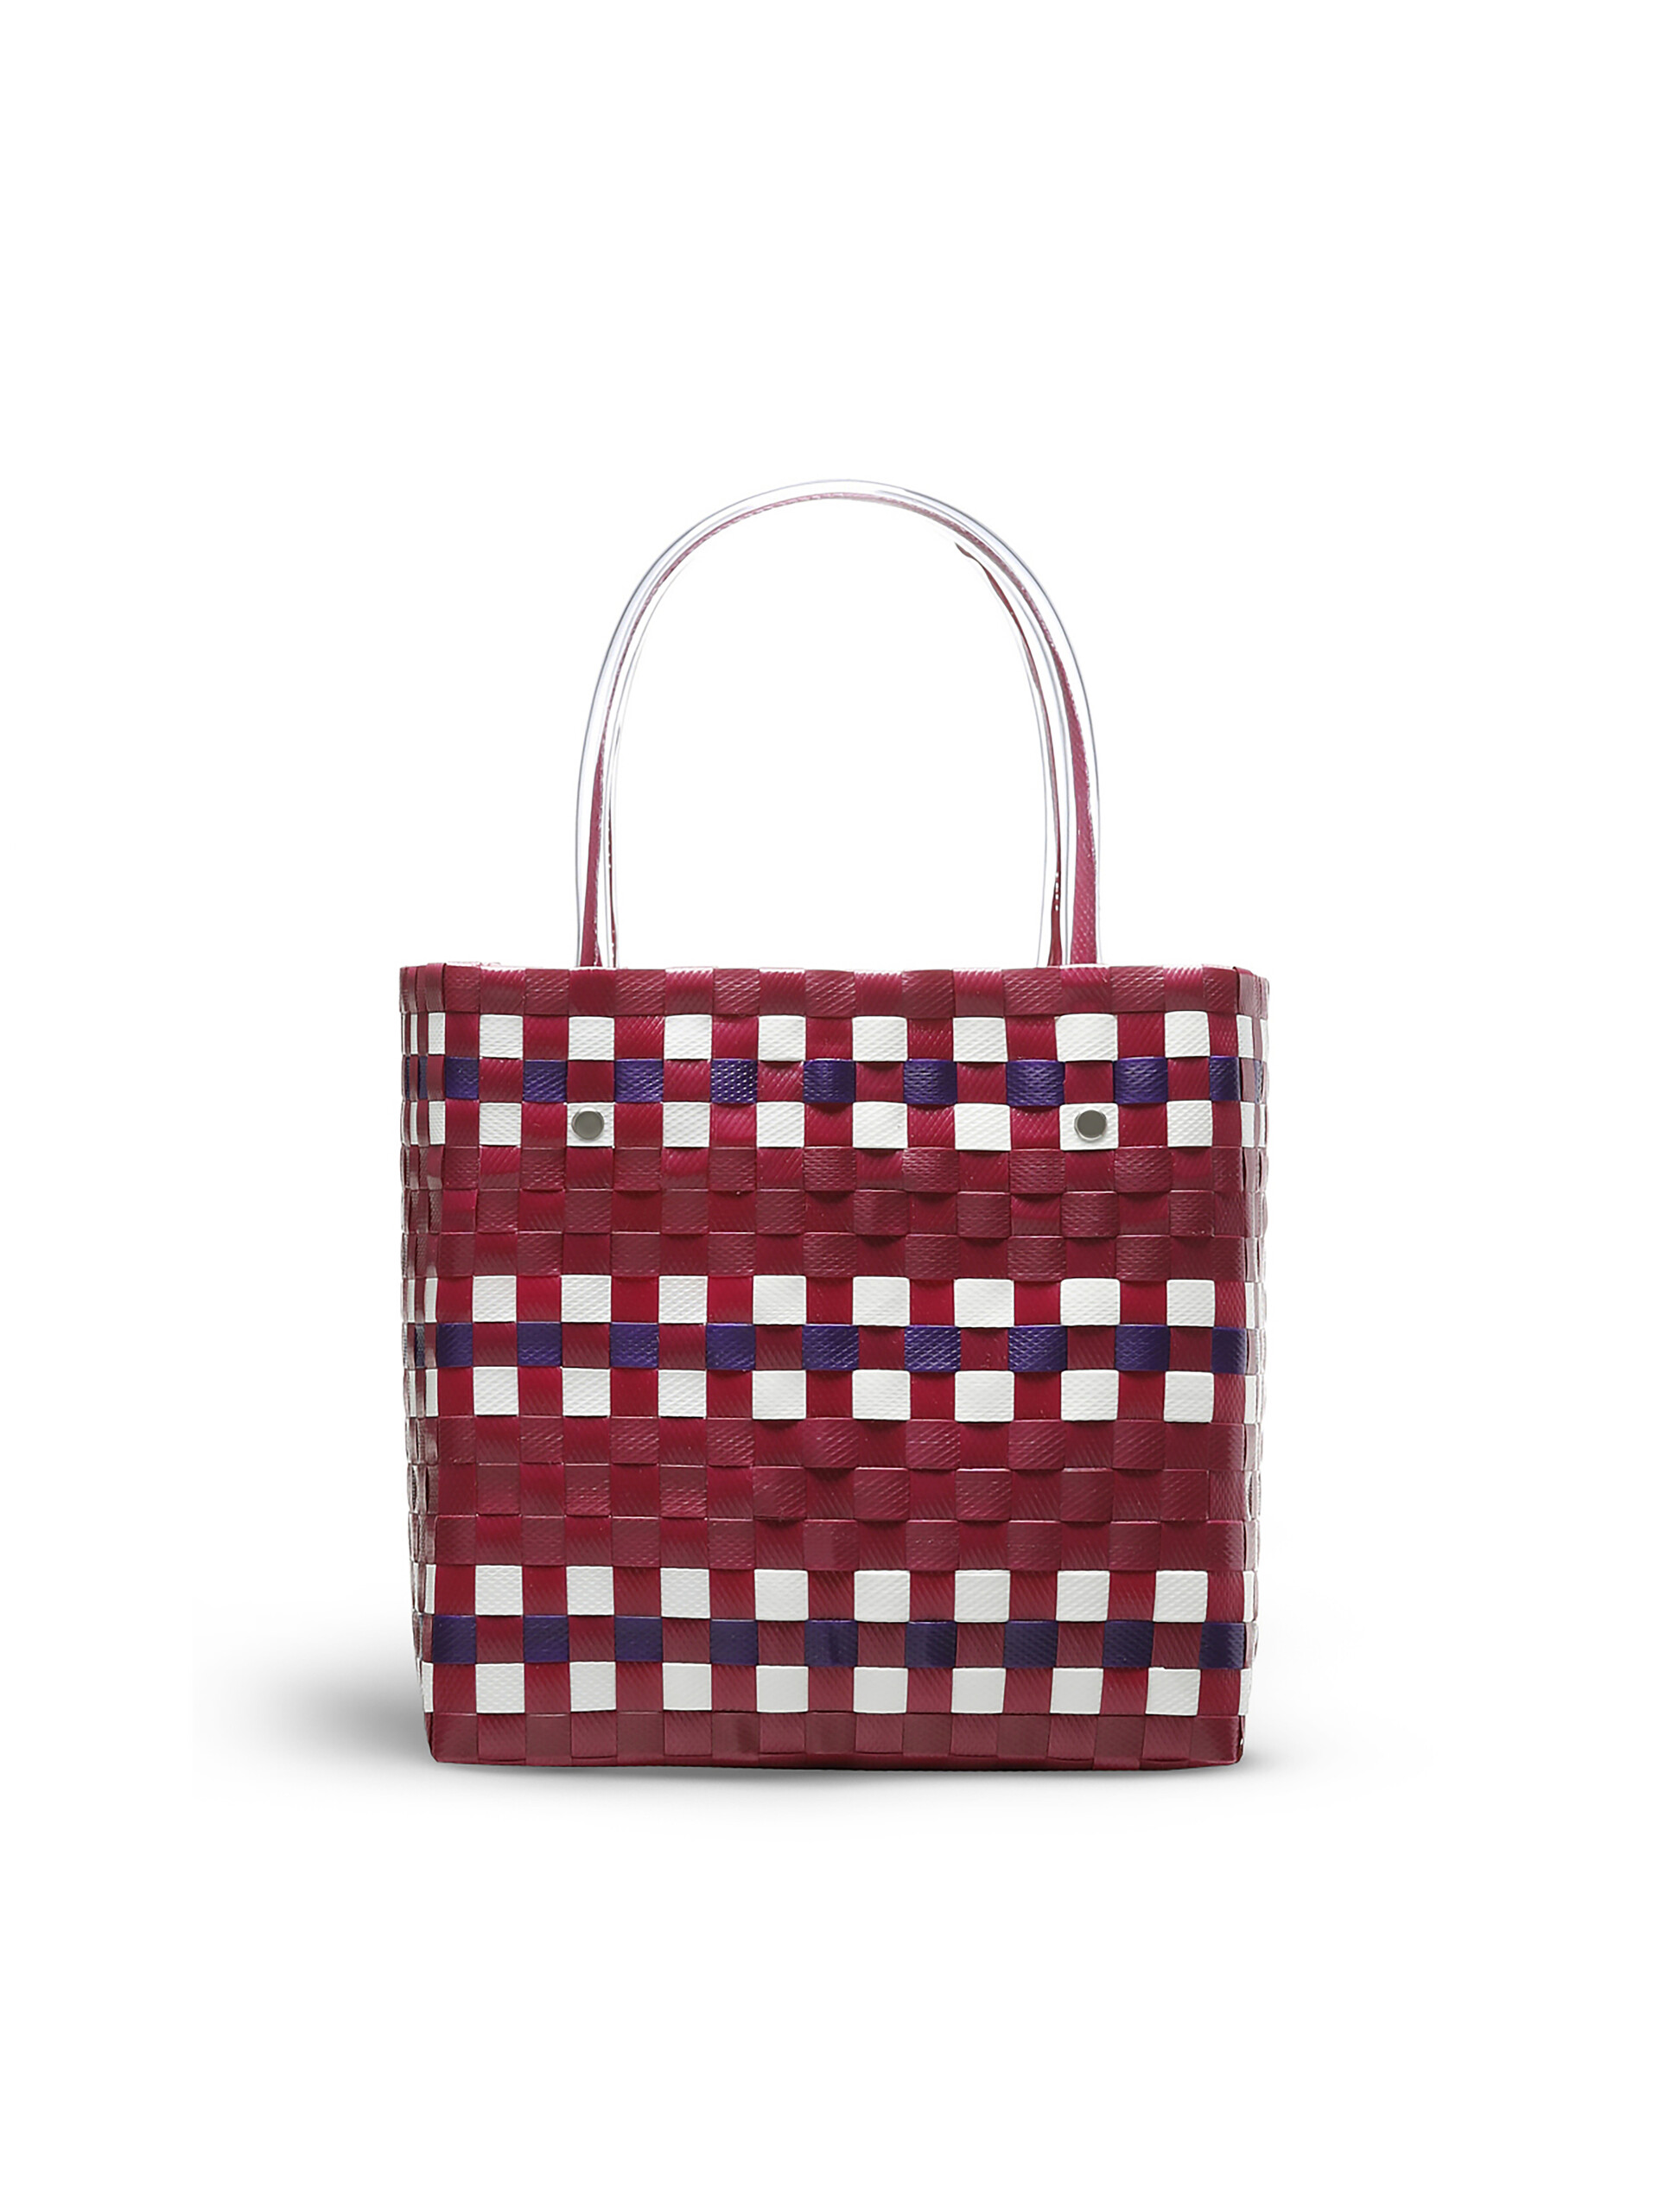 MARNI MARKET BASKET bag in pink woven material - Shopping Bags - Image 3